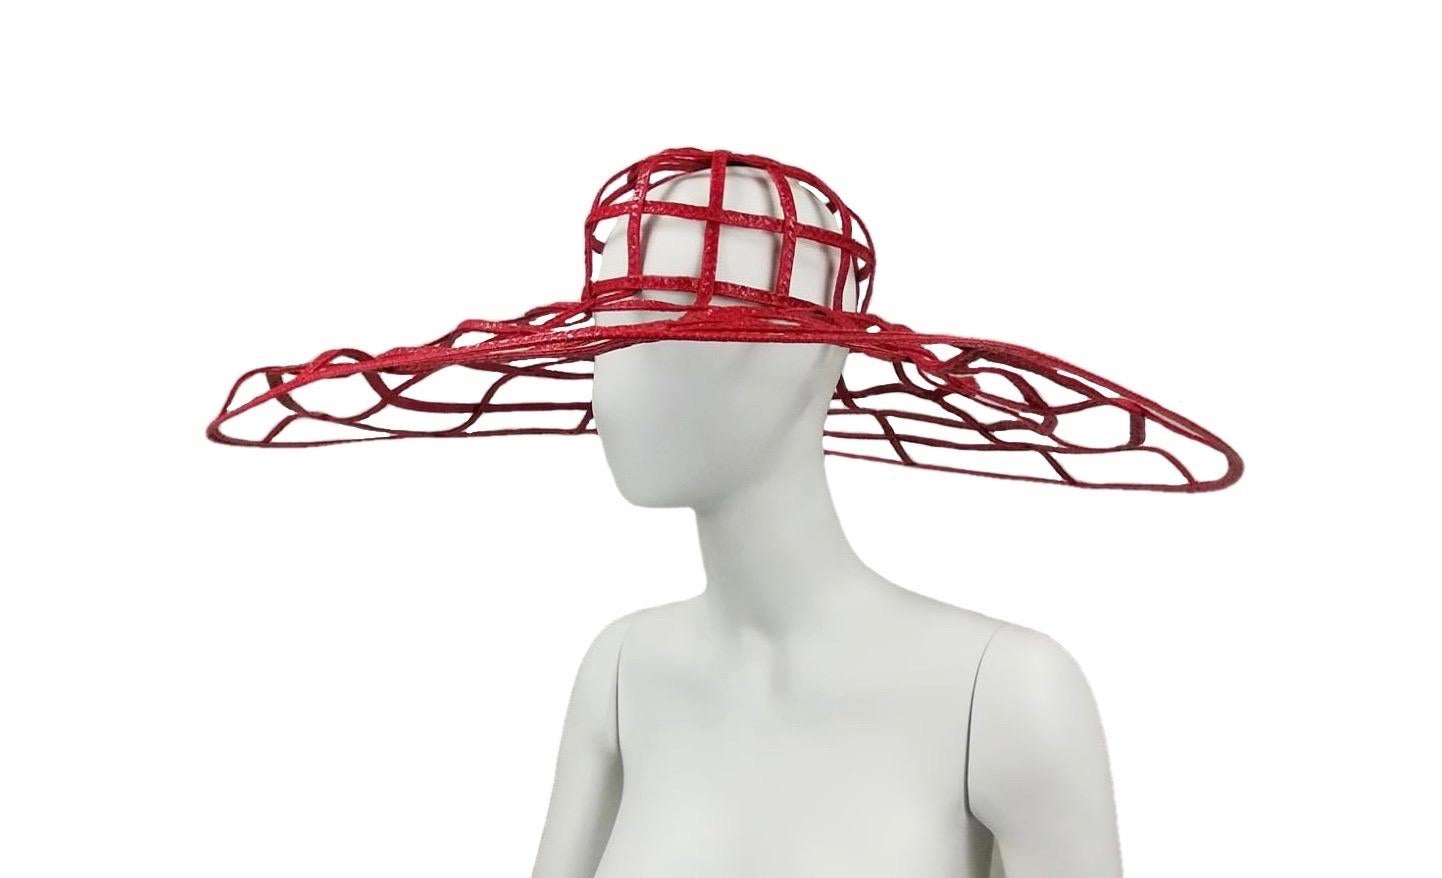 CHANEL Spring 1992 
Extremely rare reticulated hat in red raffia with a very large brim
Measure 57
External diameter cm. 66 - External circumference cm. 207
Internal diameter cm. 18.2 - Internal circumference cm. 57
In good condition, the hat has